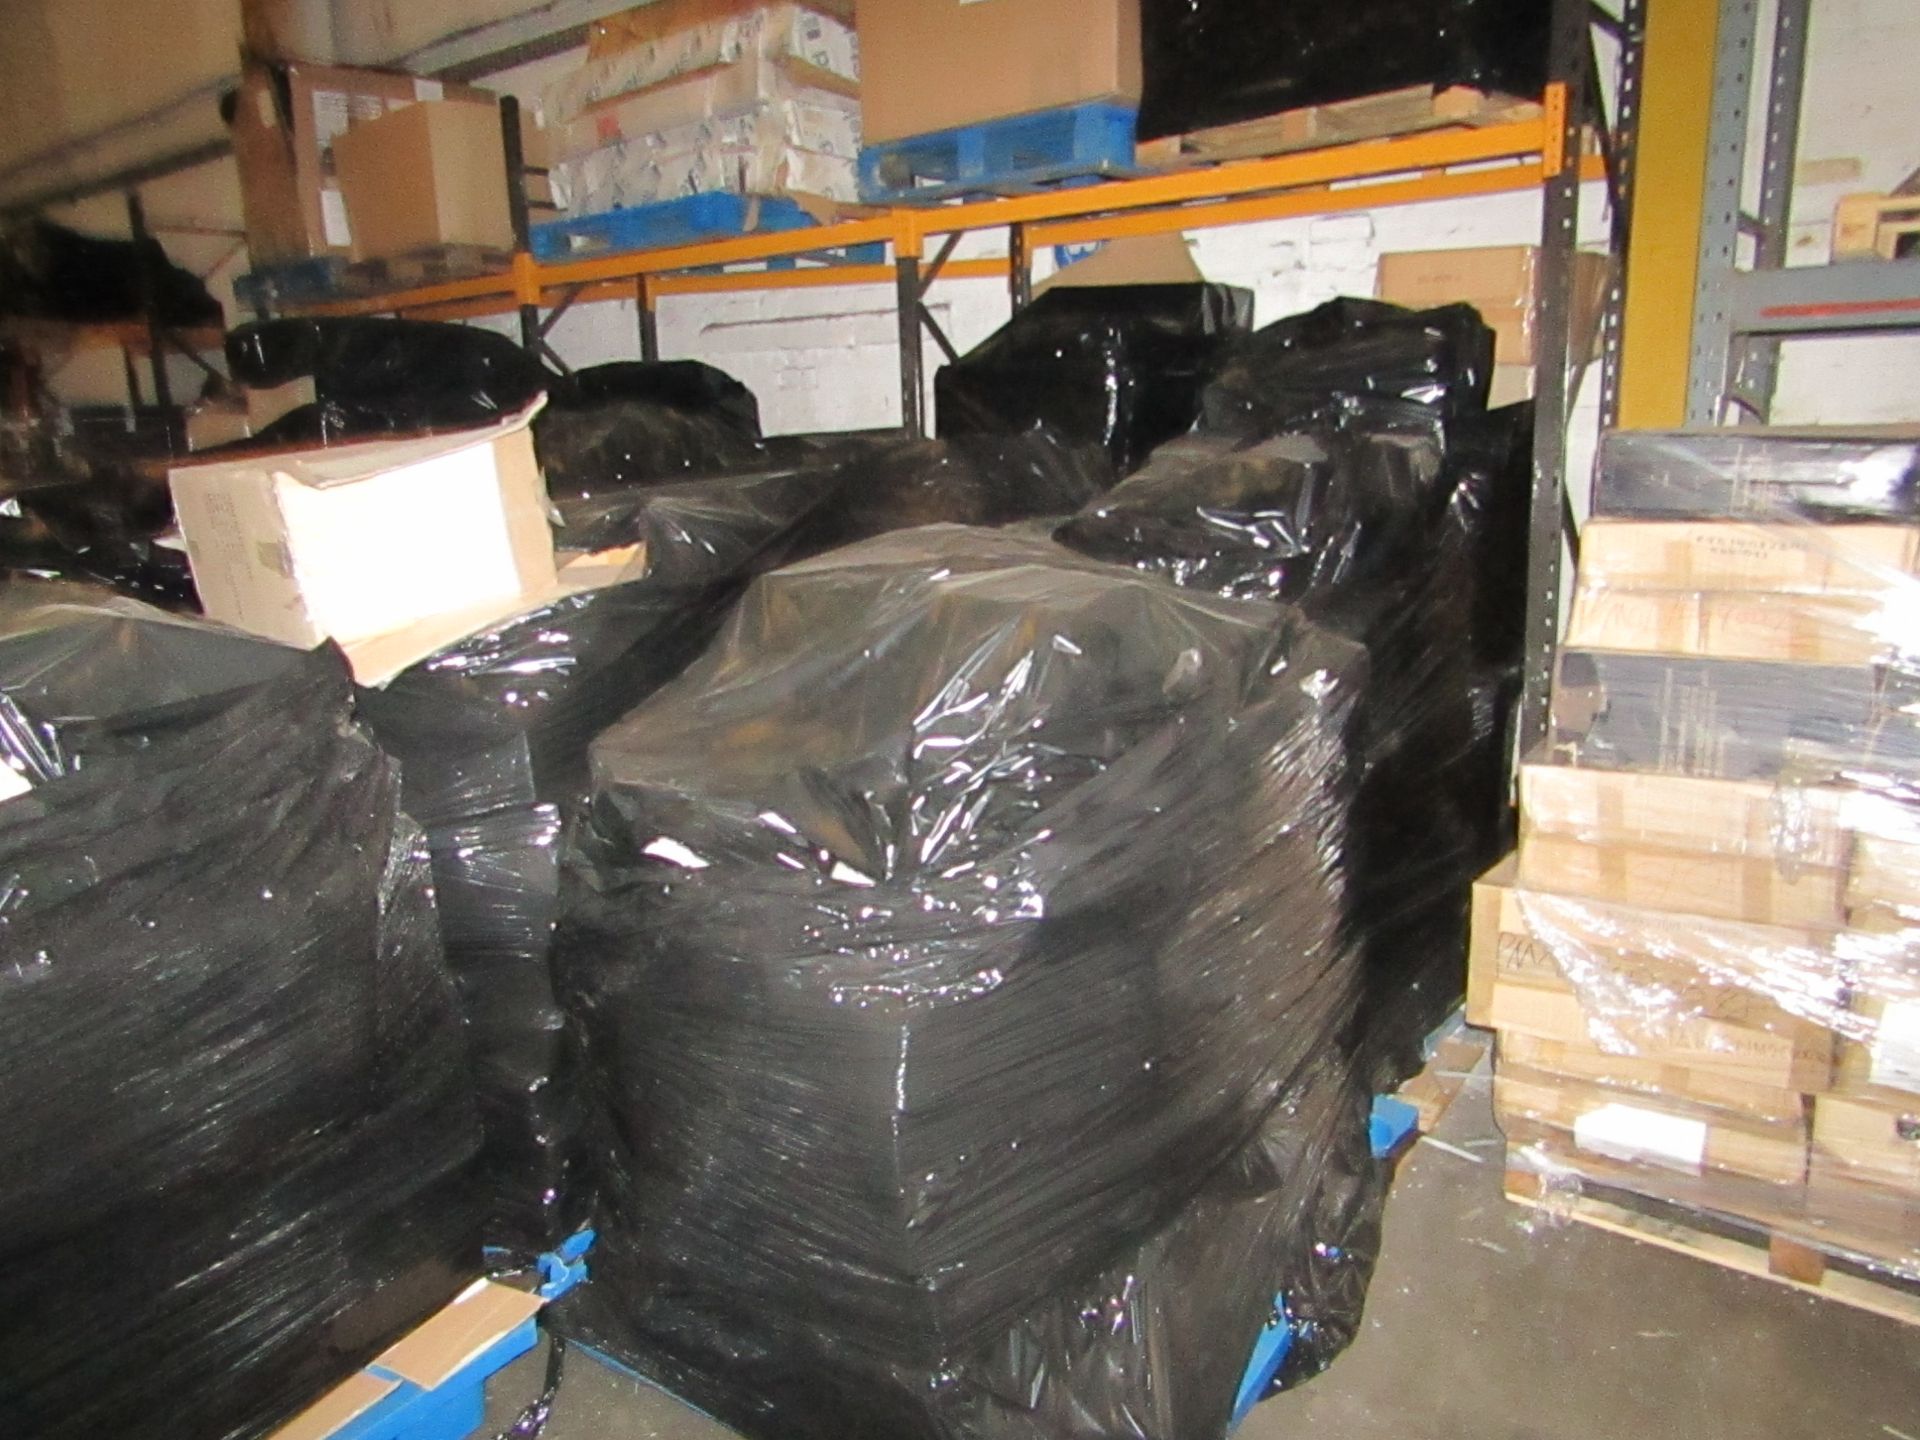 Pallet of Mixed Memorial Items which typically include Plaques, ornaments, Urns, Crystals and